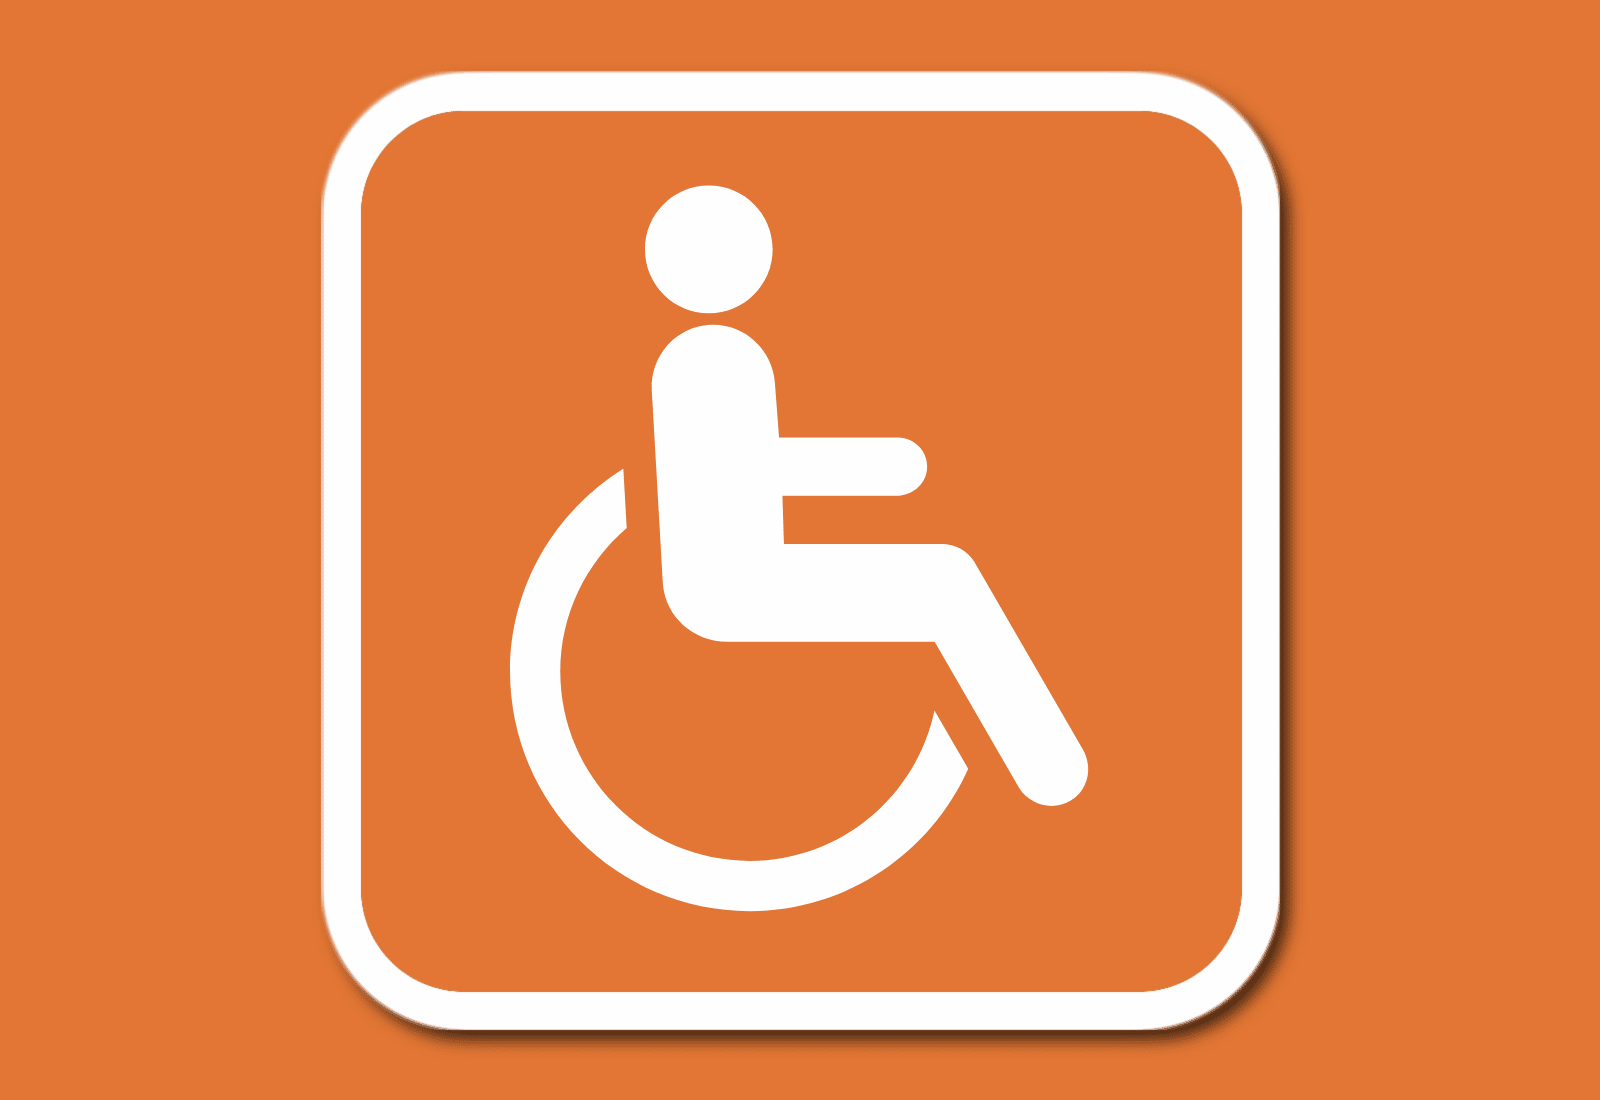 disability icon inside square with rounded corners